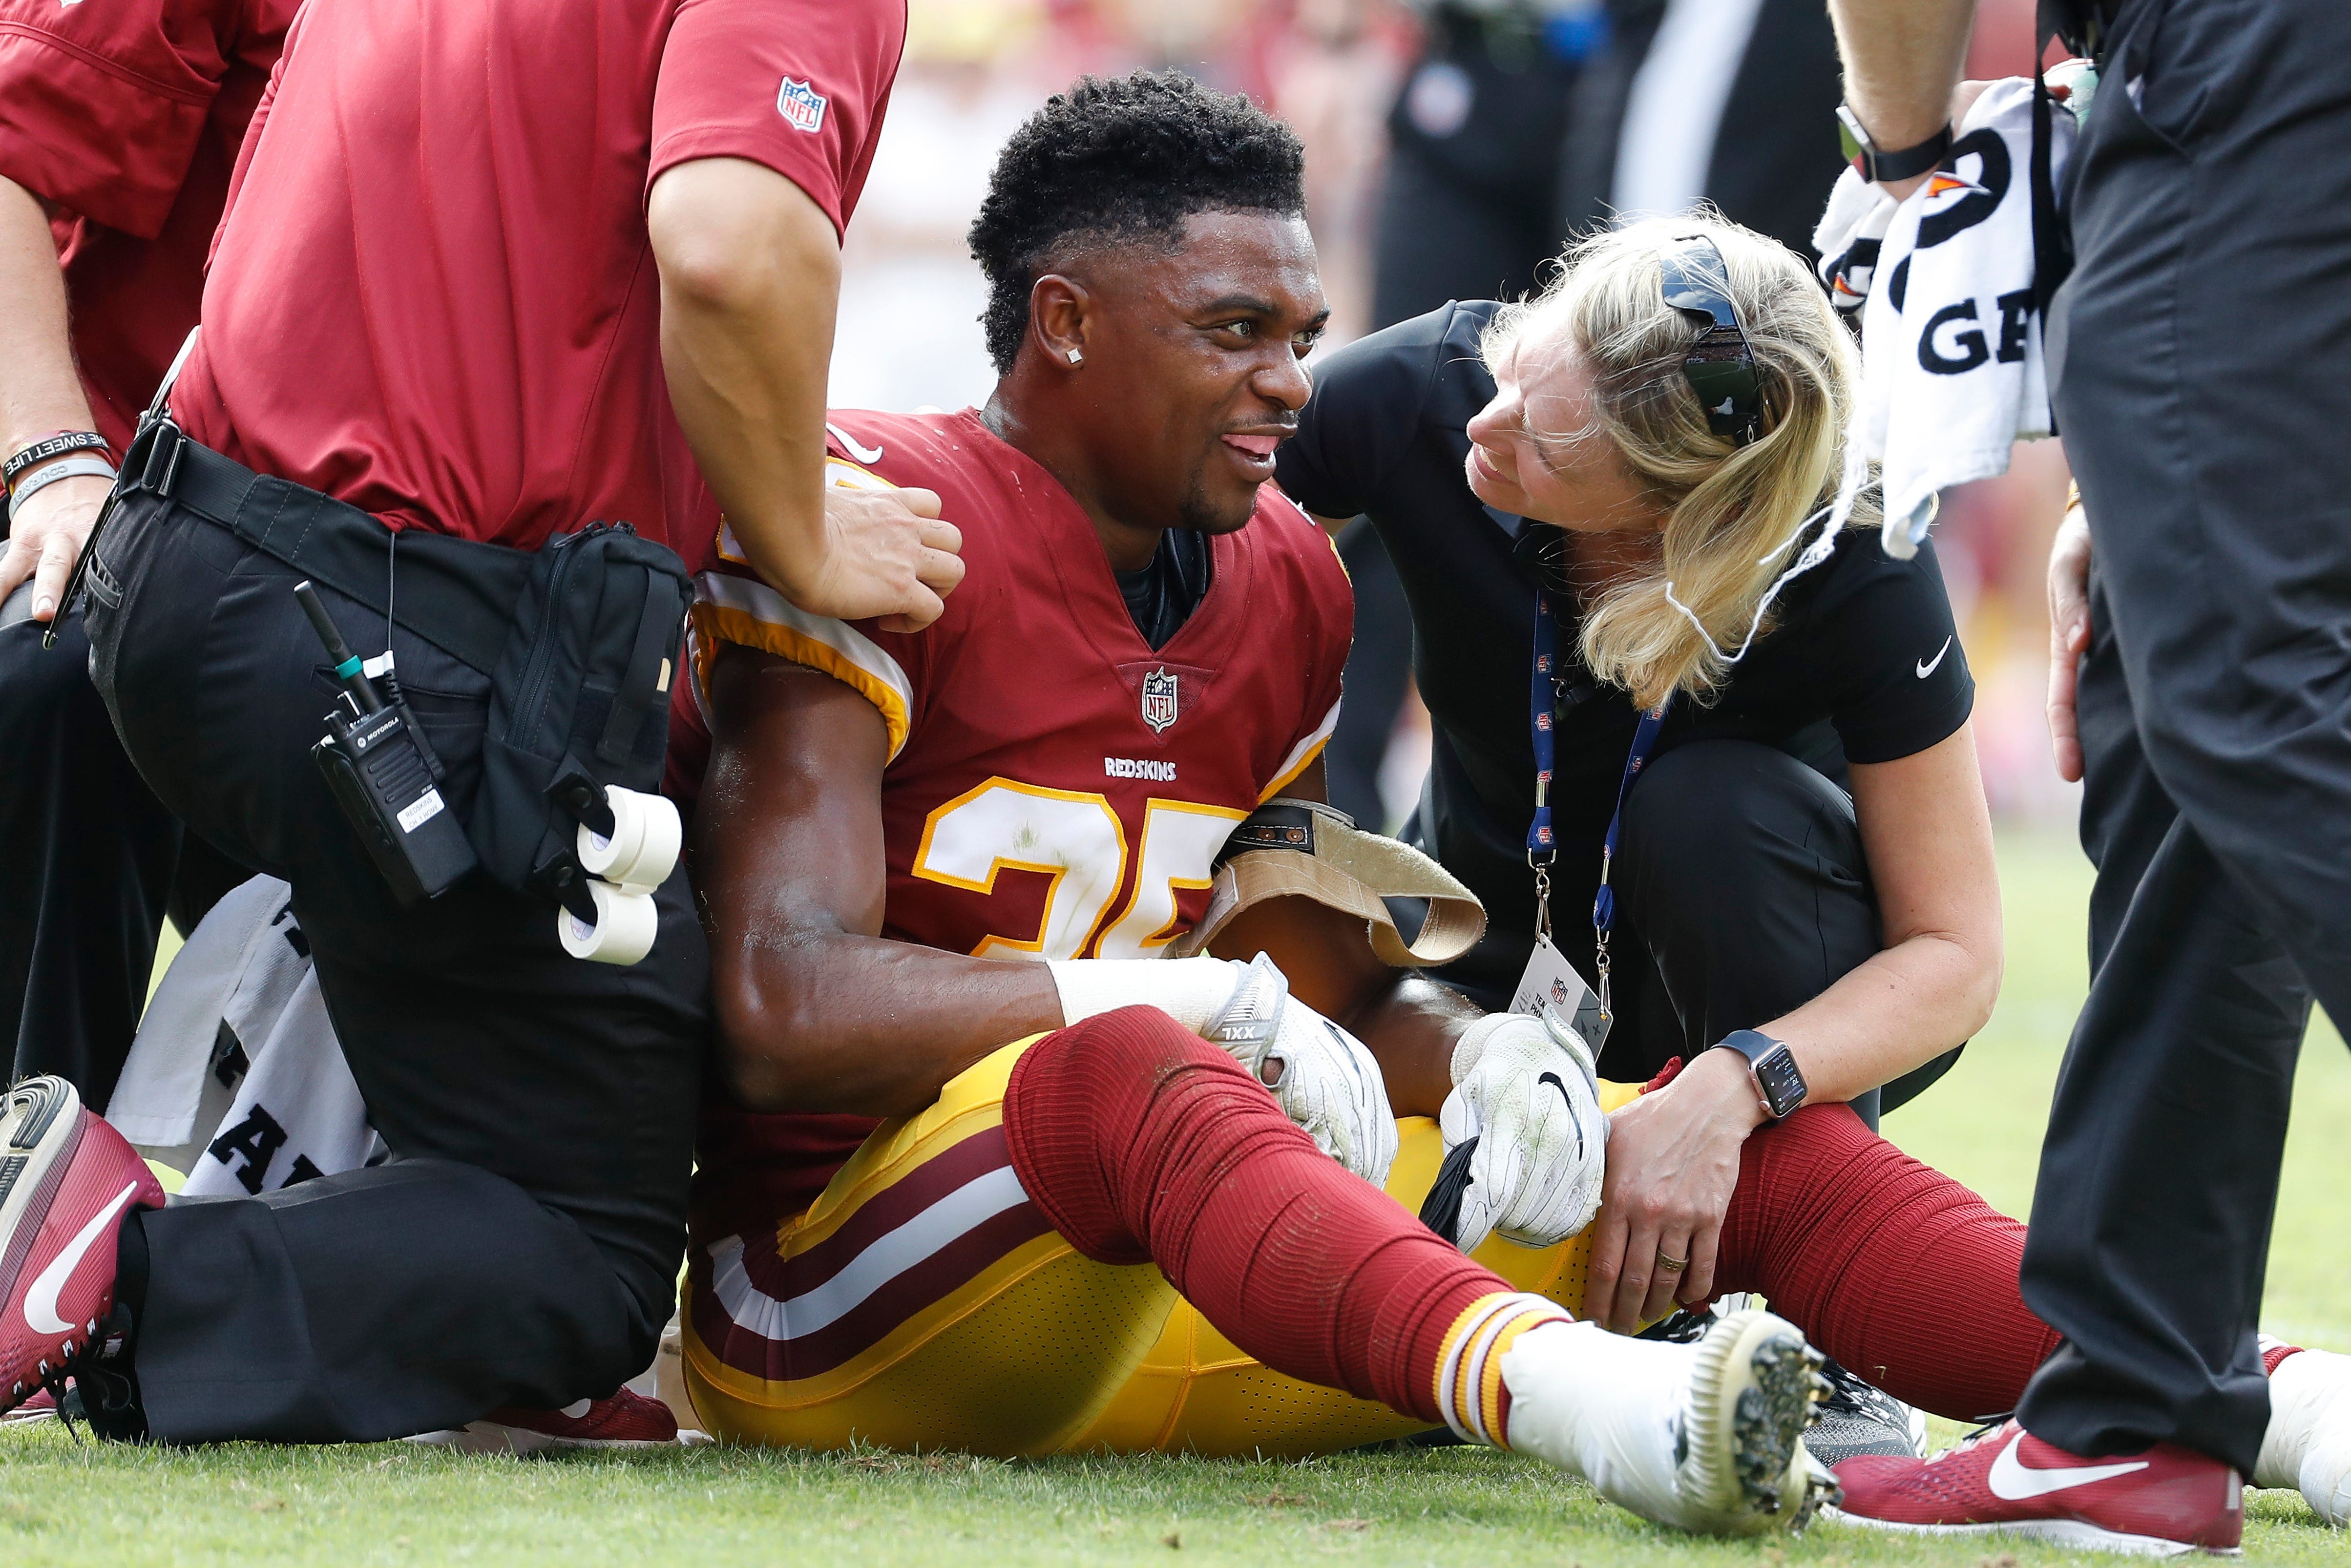 Redskins' Nicholson arrested, charged with assault & battery